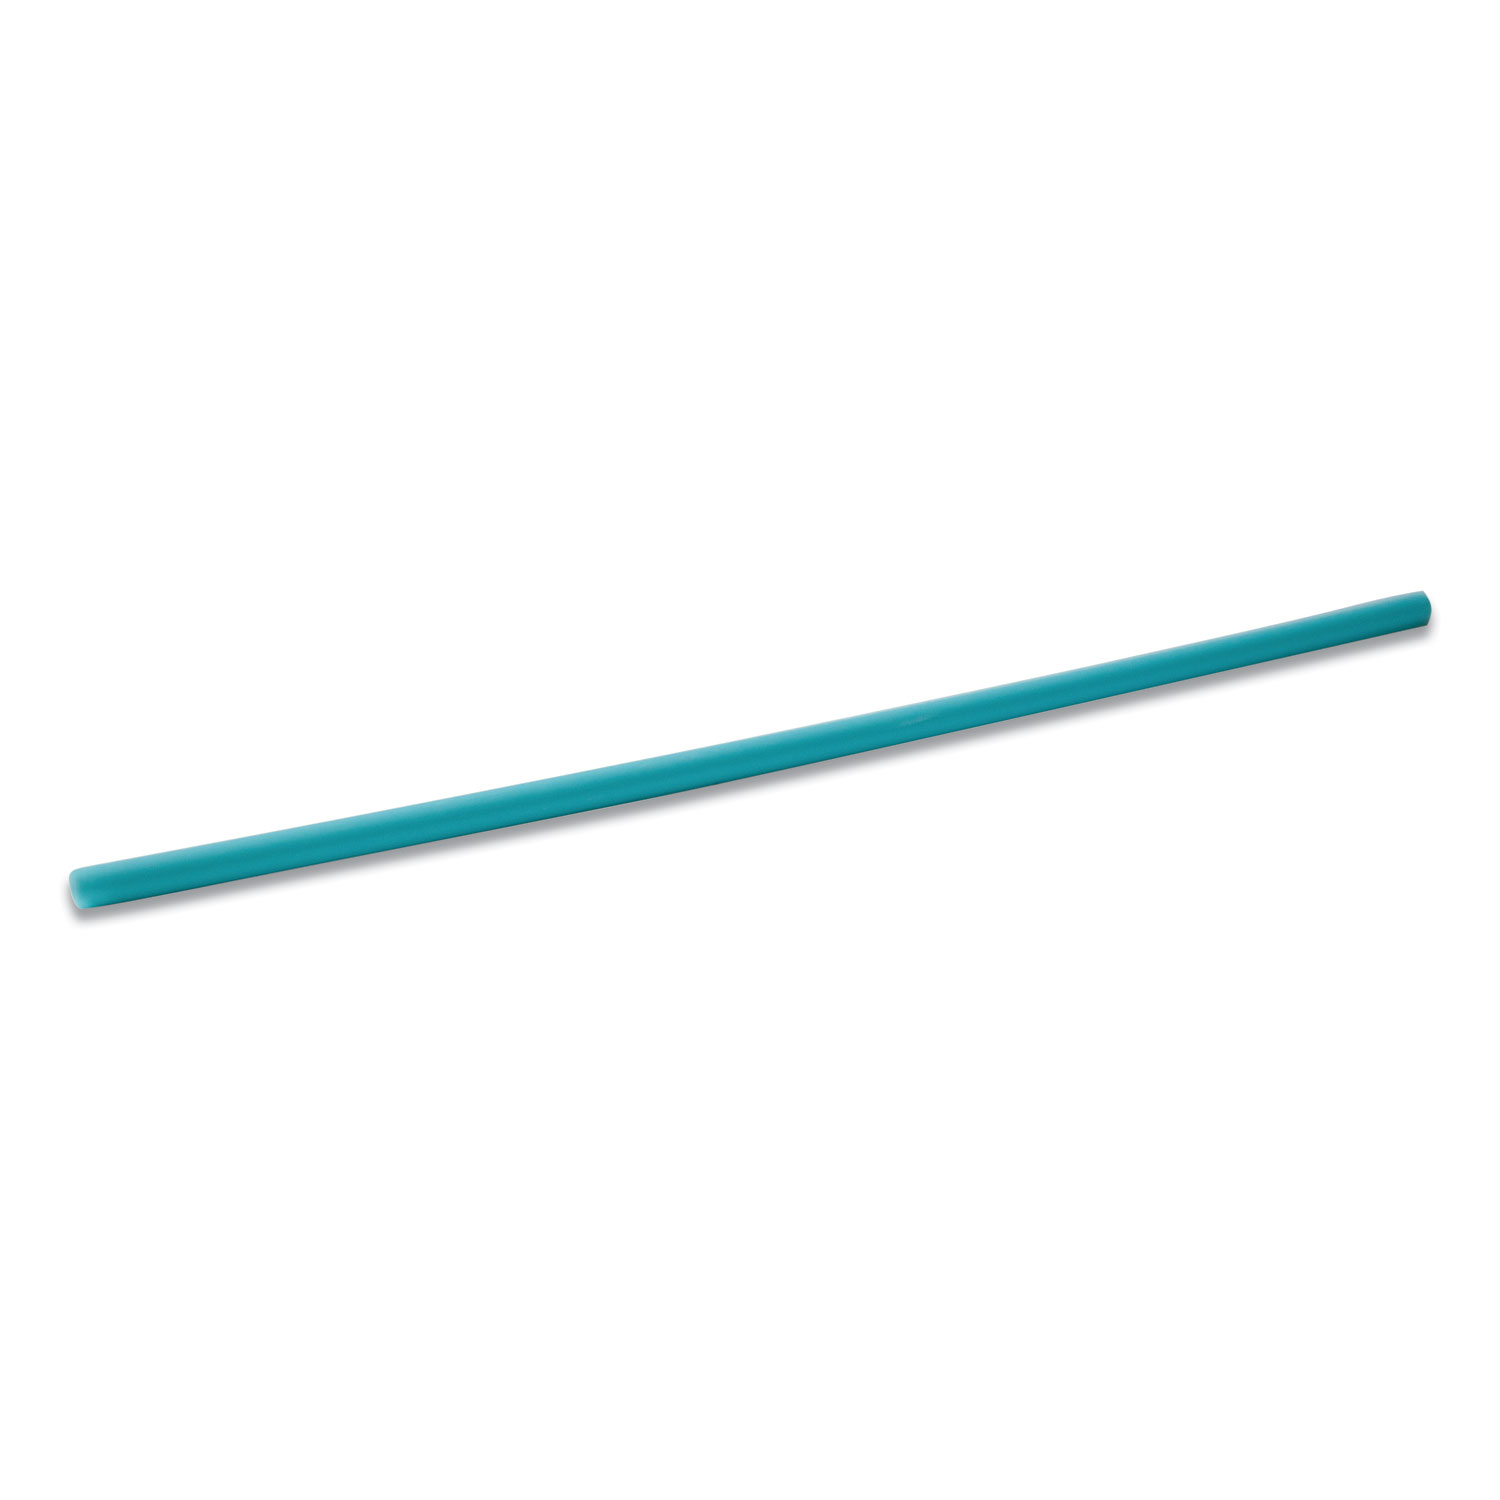 phade™ Marine Biodegradable Stir Straws, 5, Ocean Blue, 1,000/Box, 6 Boxes/Carton, Packaged for Sale in CA and MD